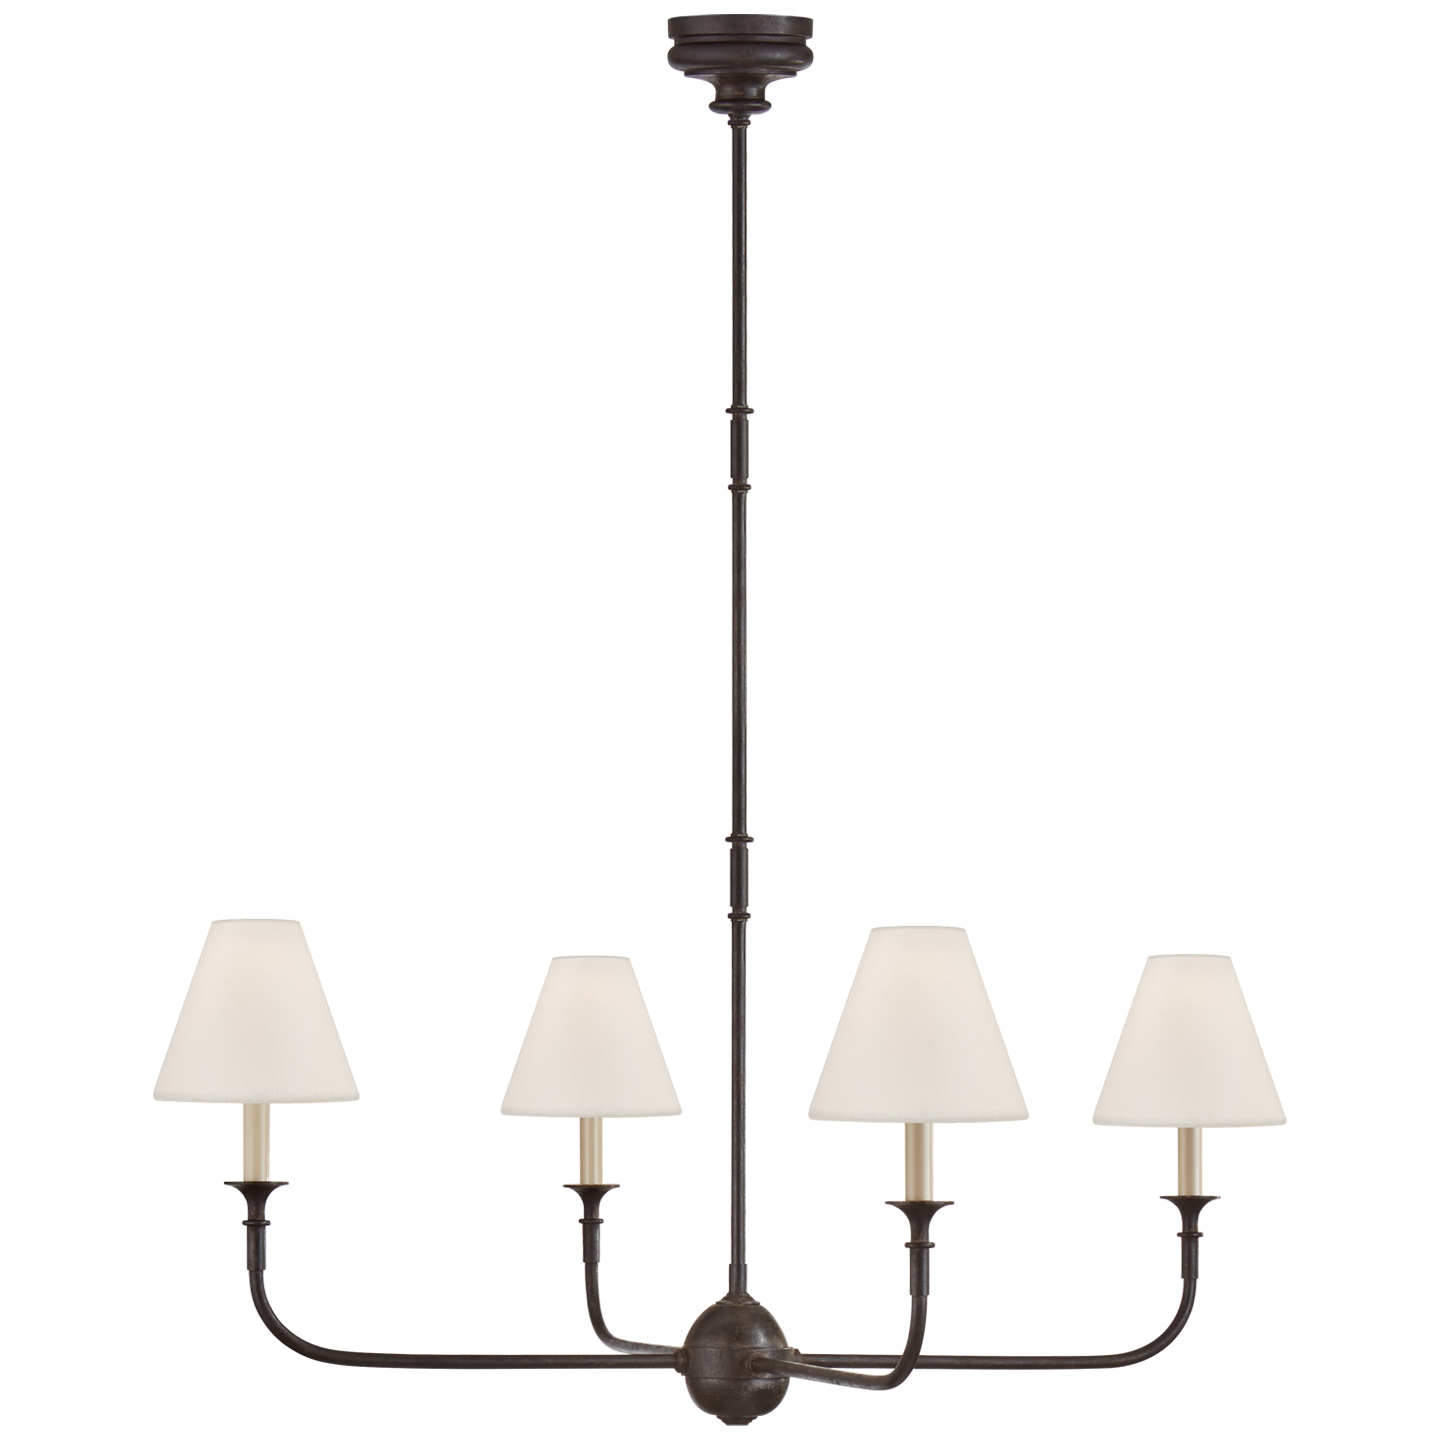 This Piaf Large Chandelier from Visual Comfort has linen shades and brings a warm, classic look to any dining room, living room, or other large space. The chandelier comes in two colors, the first is "Aged Iron and Ebonized Oak" and the second is "Swedish Grey".